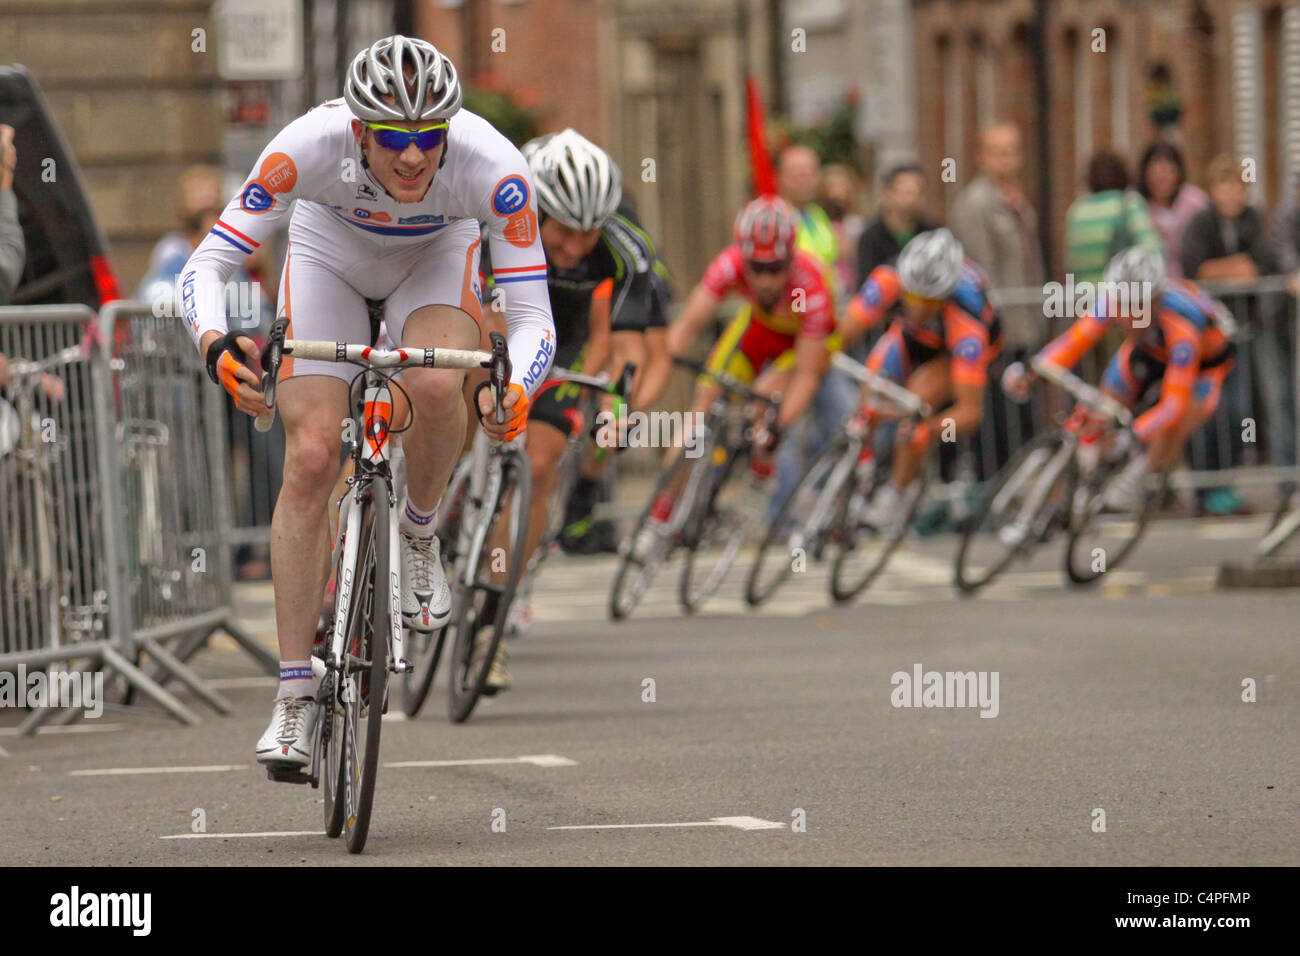 Ed Clancy MBE racing in road race Stock Photo